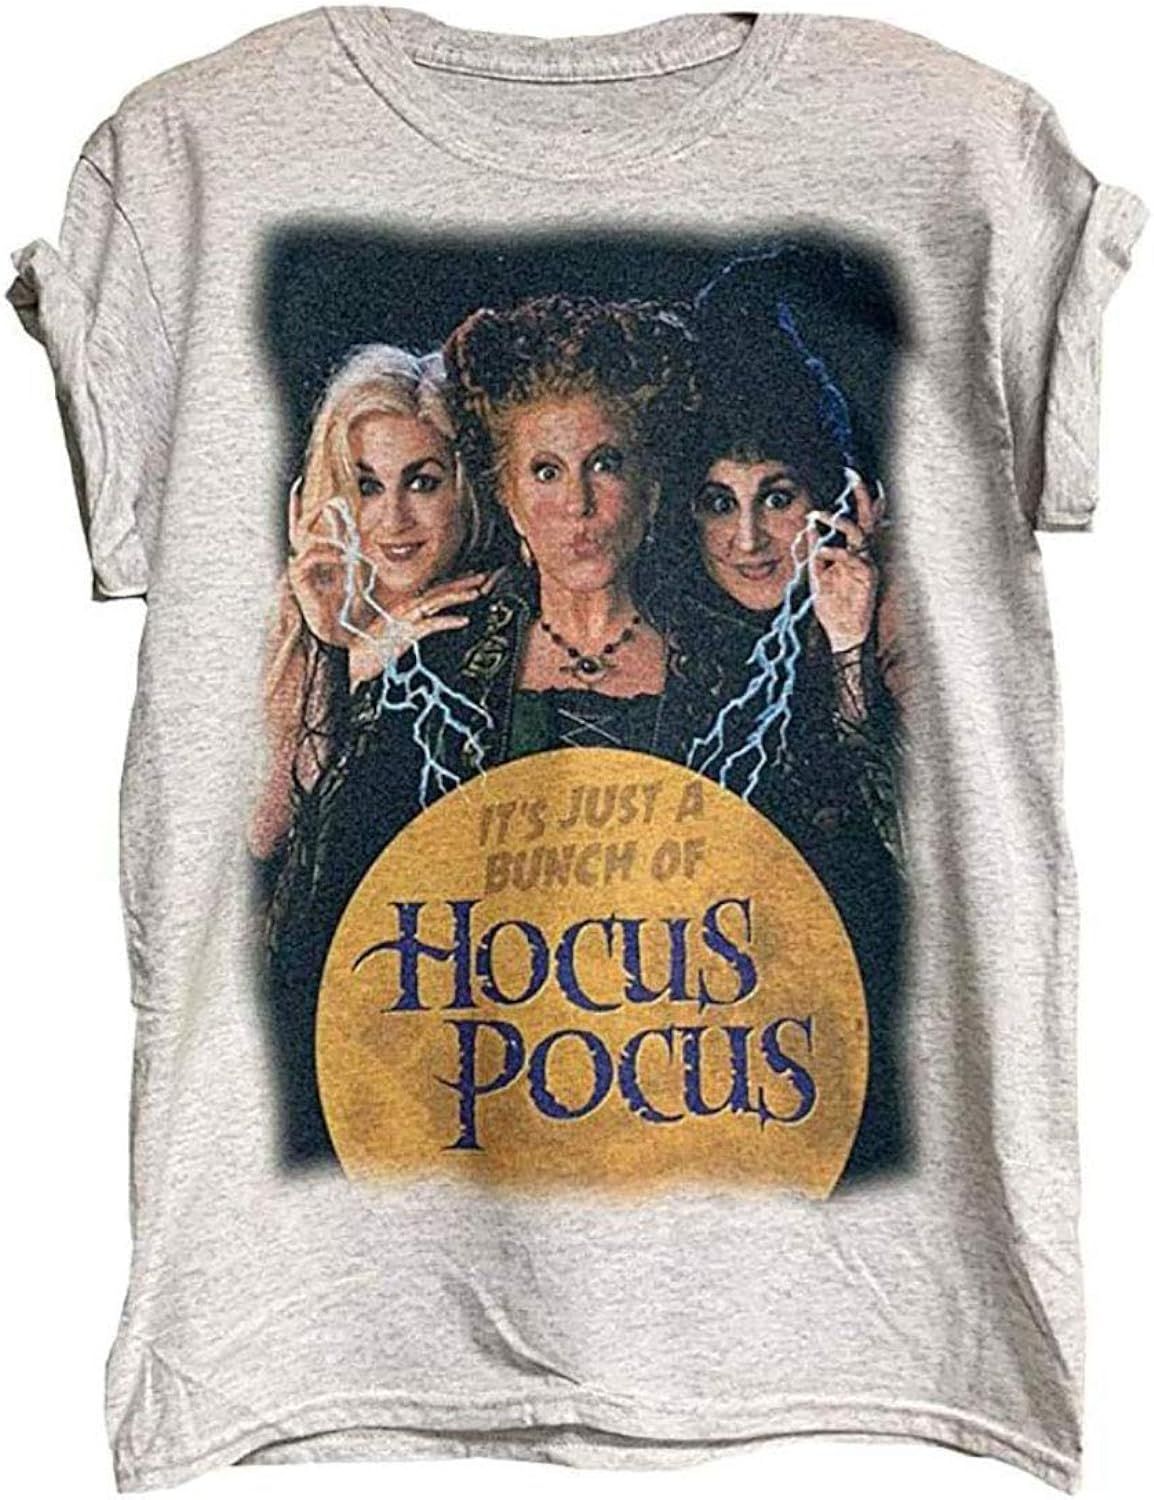 AIMITAG Halloween Sanderson Sisters T Shirt It's Just A Bunch of Hocus Pocus Tees for Women Fall Gra | Amazon (US)